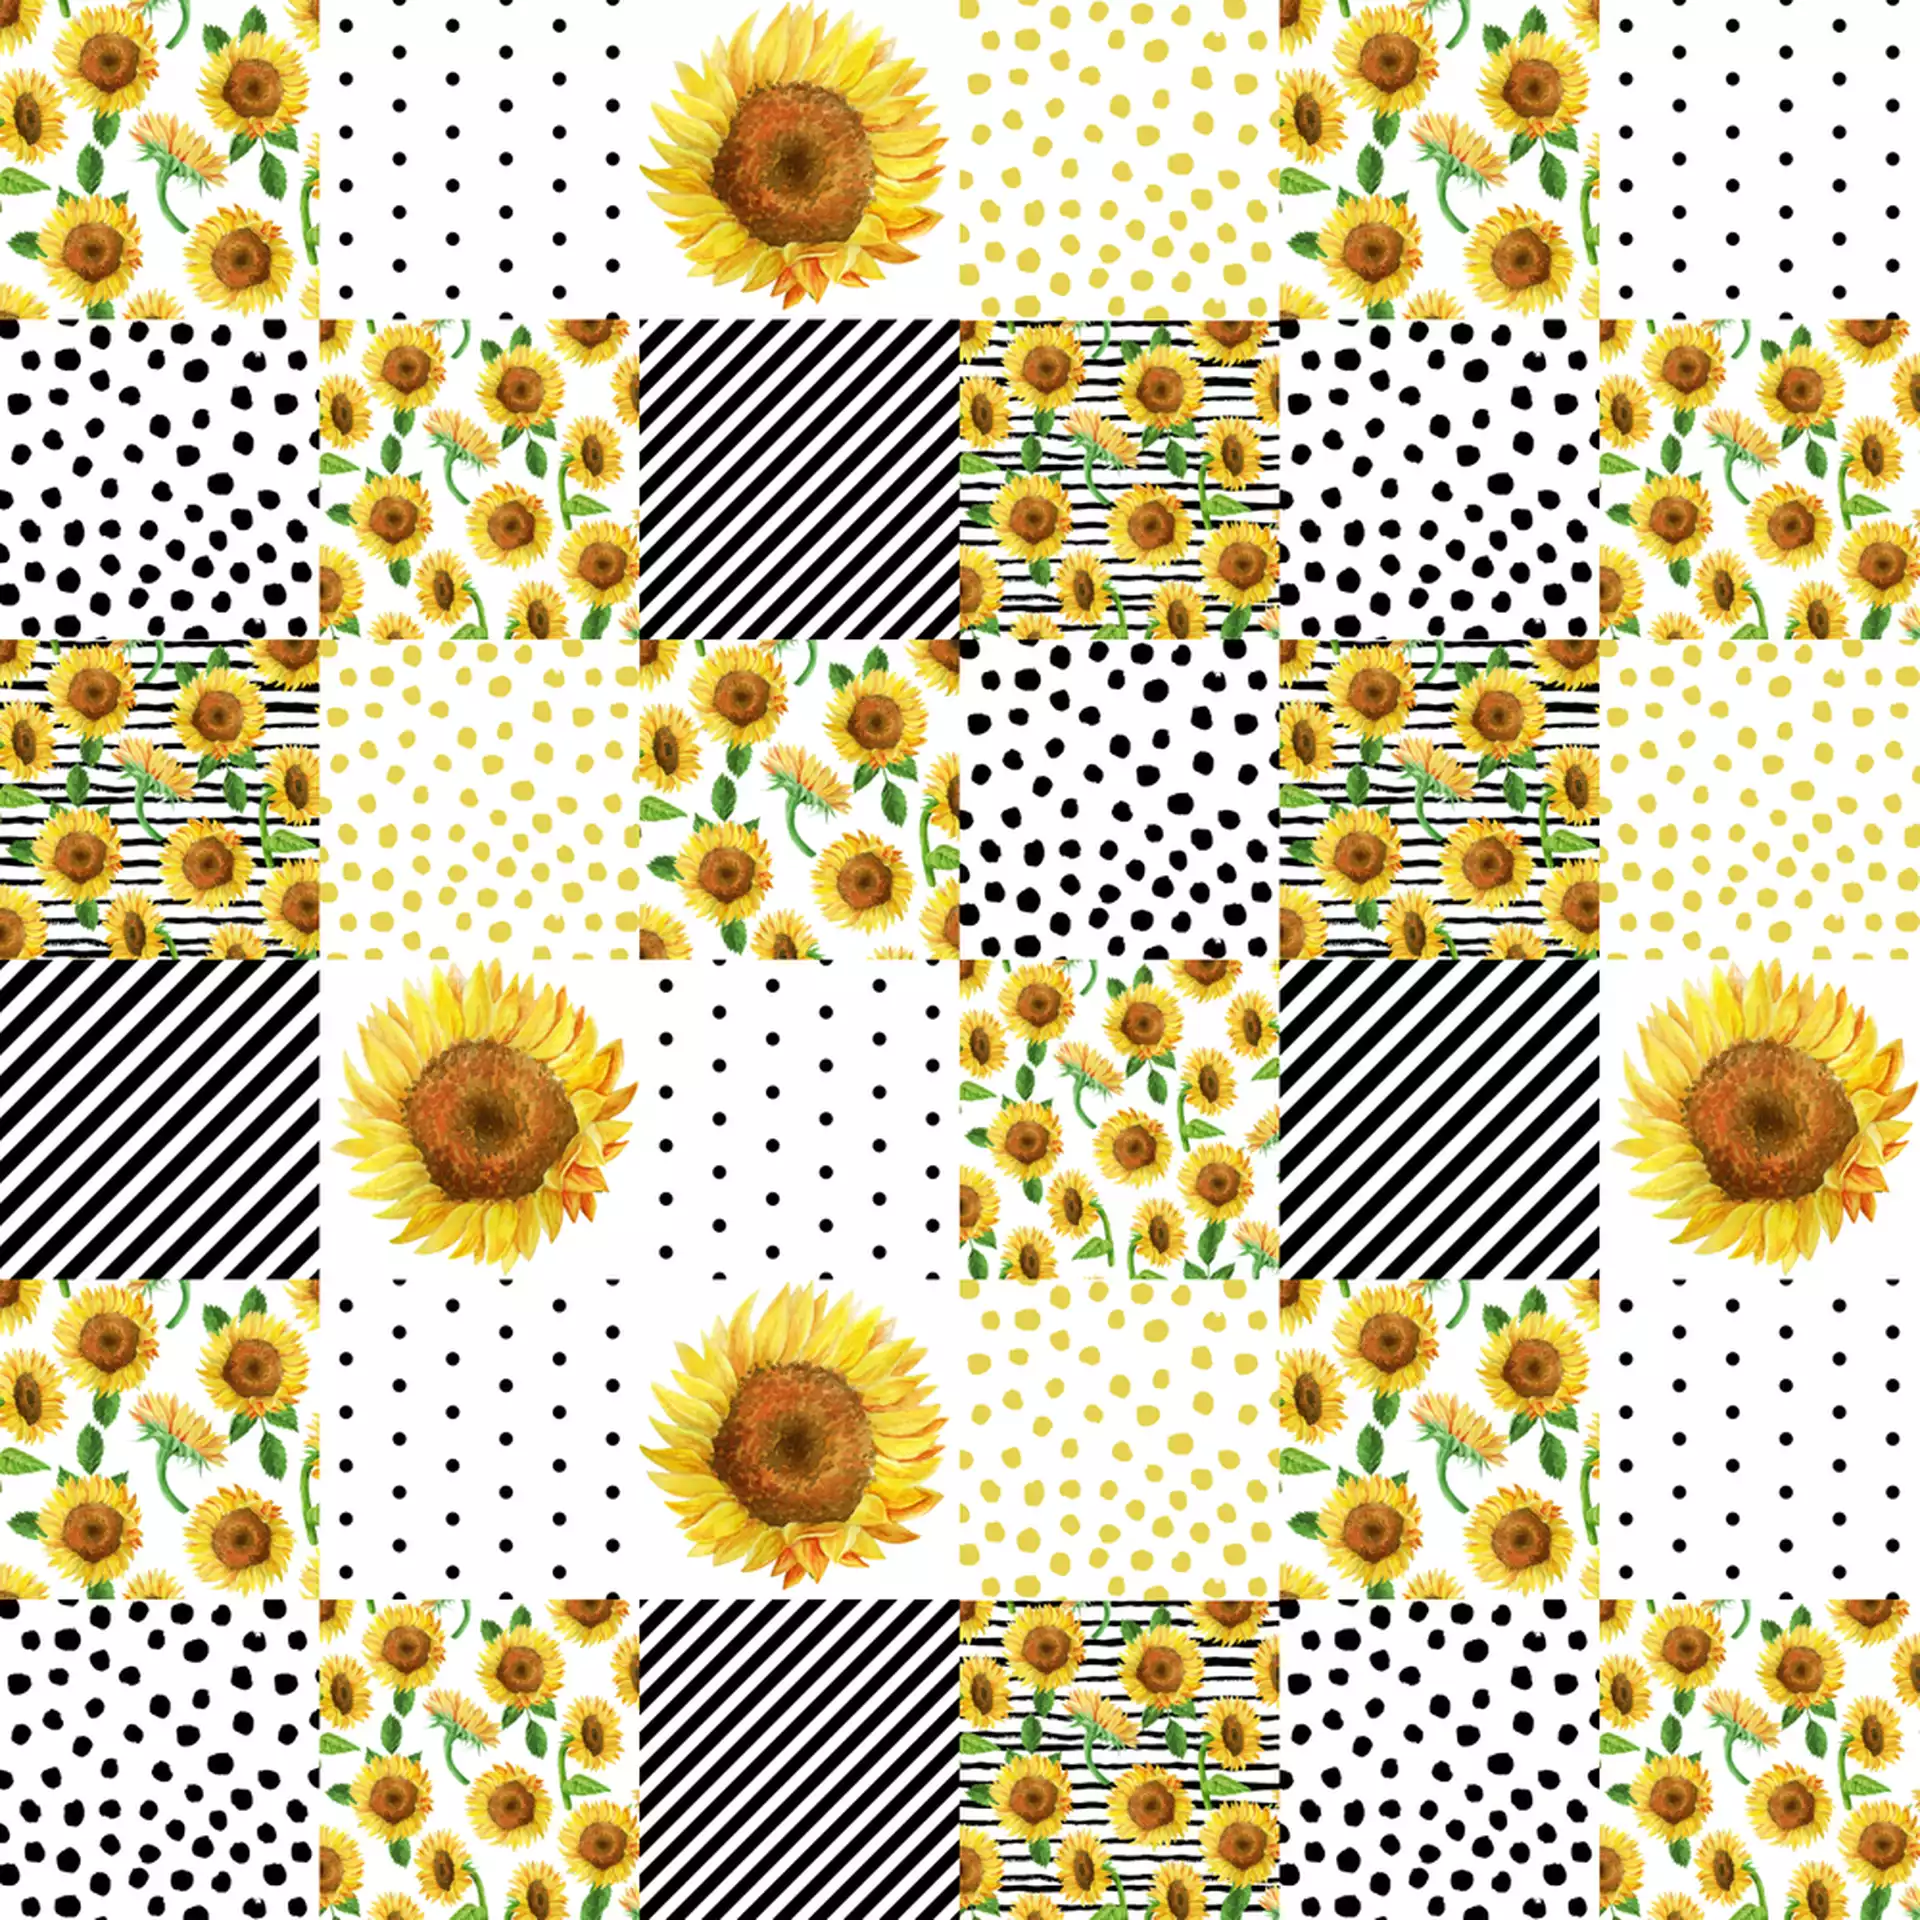 Sunflower Quilt - Patchwork, Boho, Summer, Black And White, Feminine, Floral, Couch Throw Pillow by Charlottewinter - Cover (18" x 18") with pillow insert - Outdoor Pillow